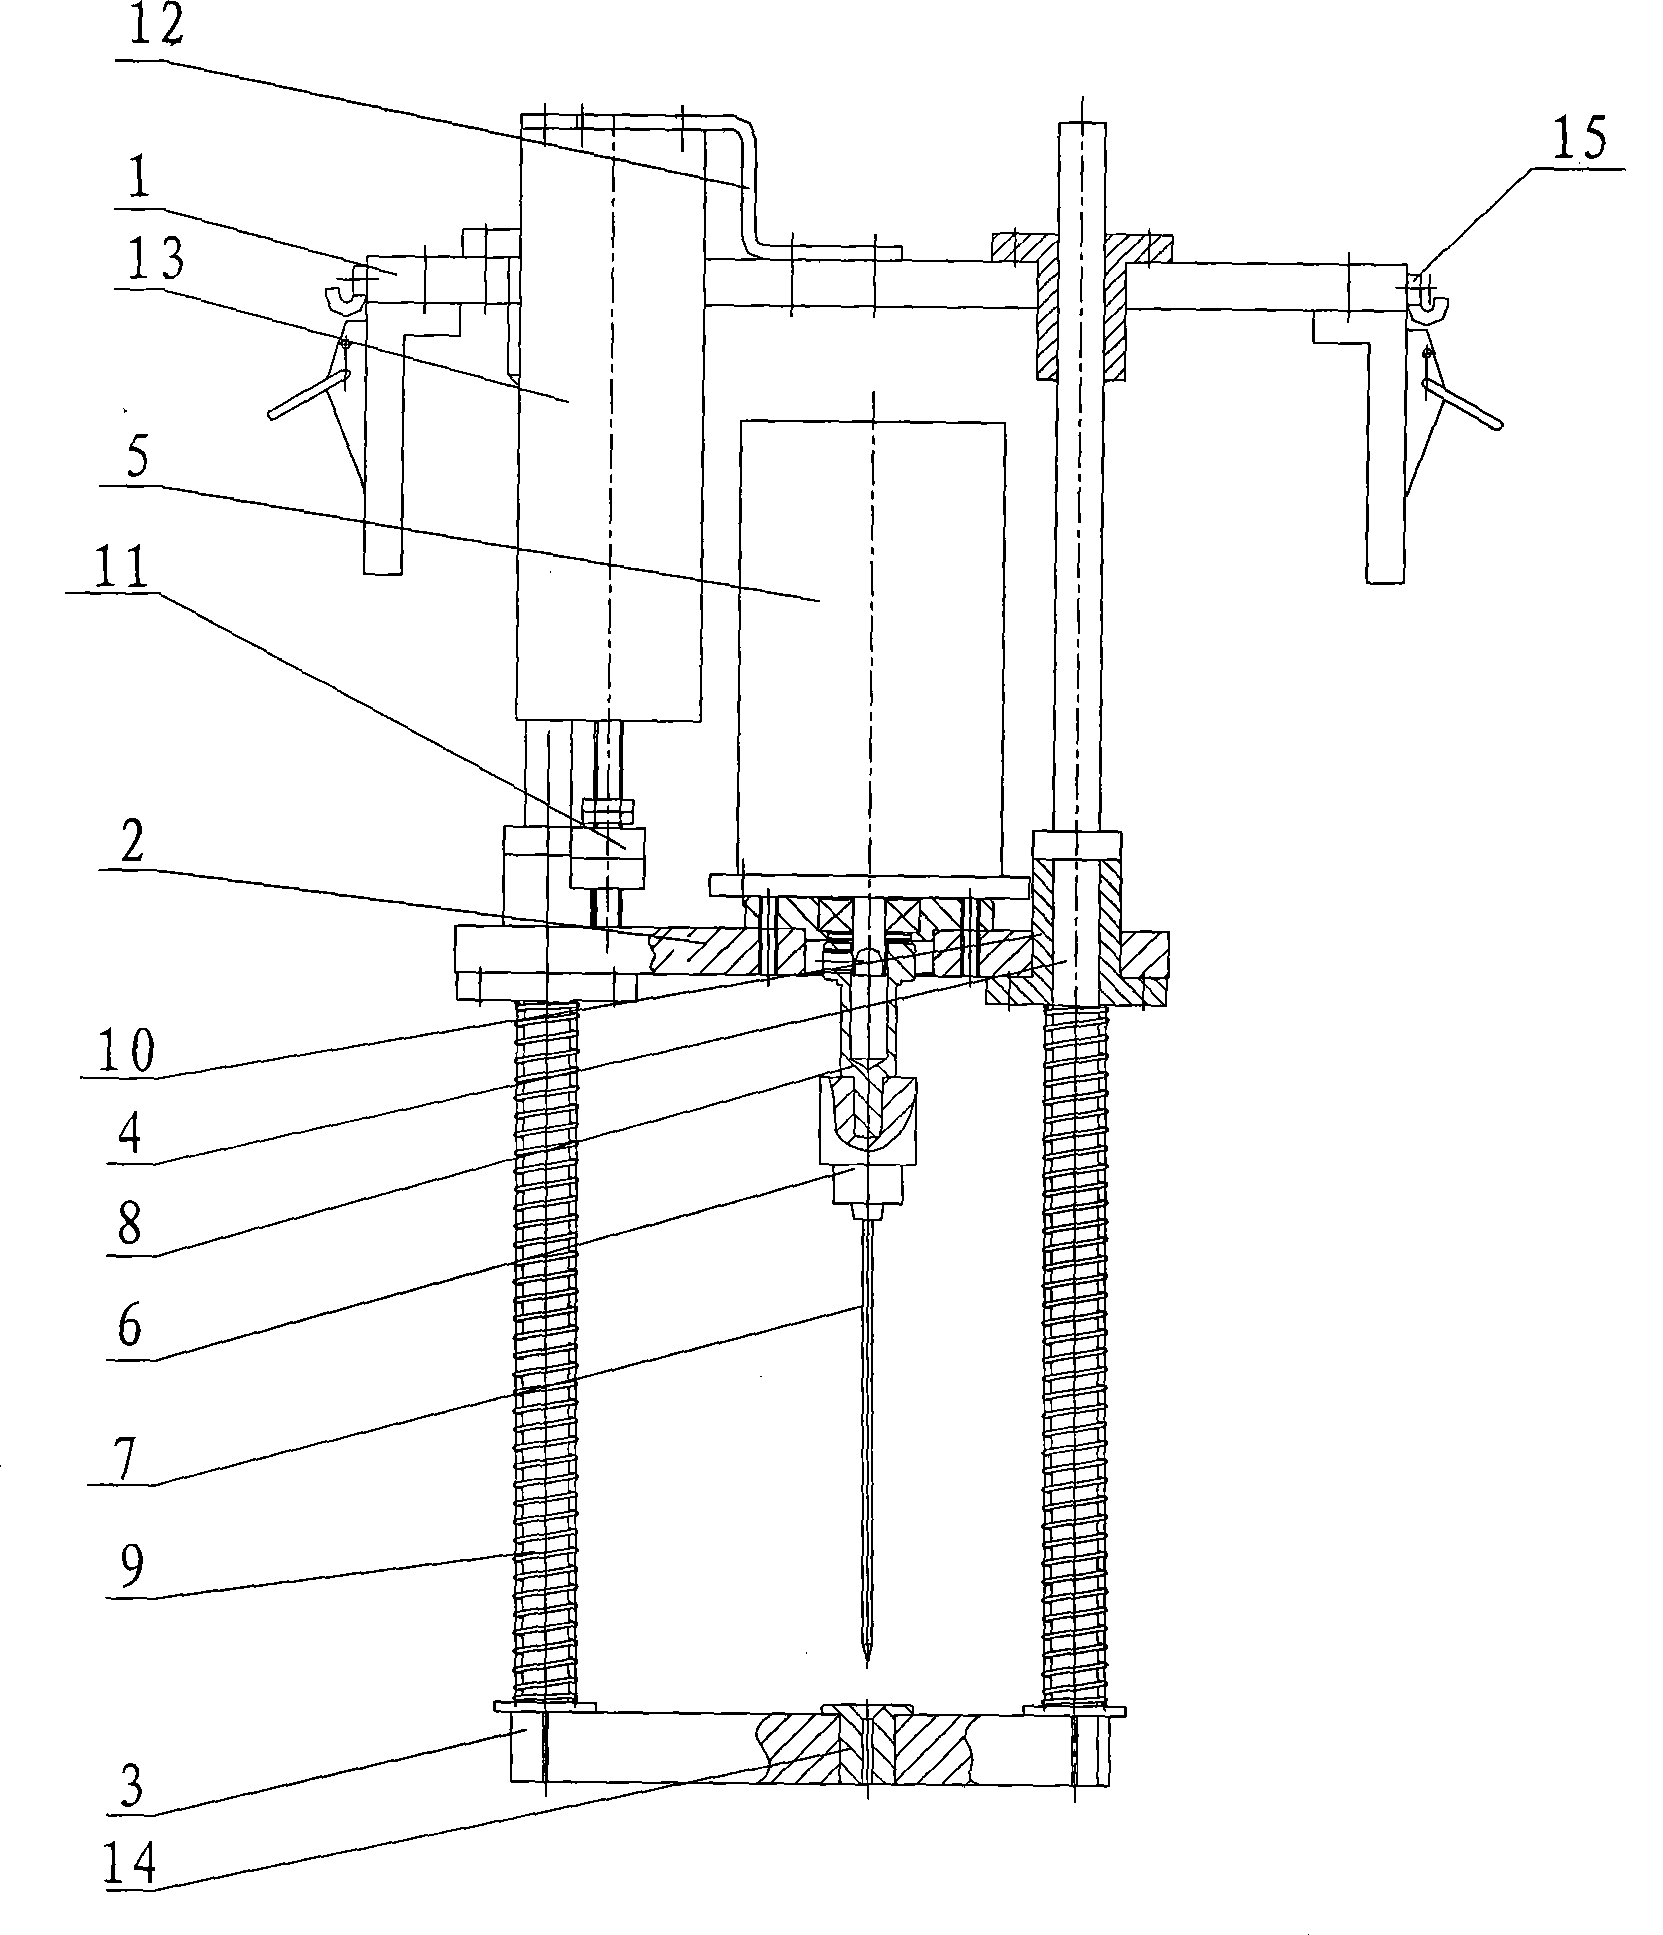 Perforating device for automatic cloth cutter